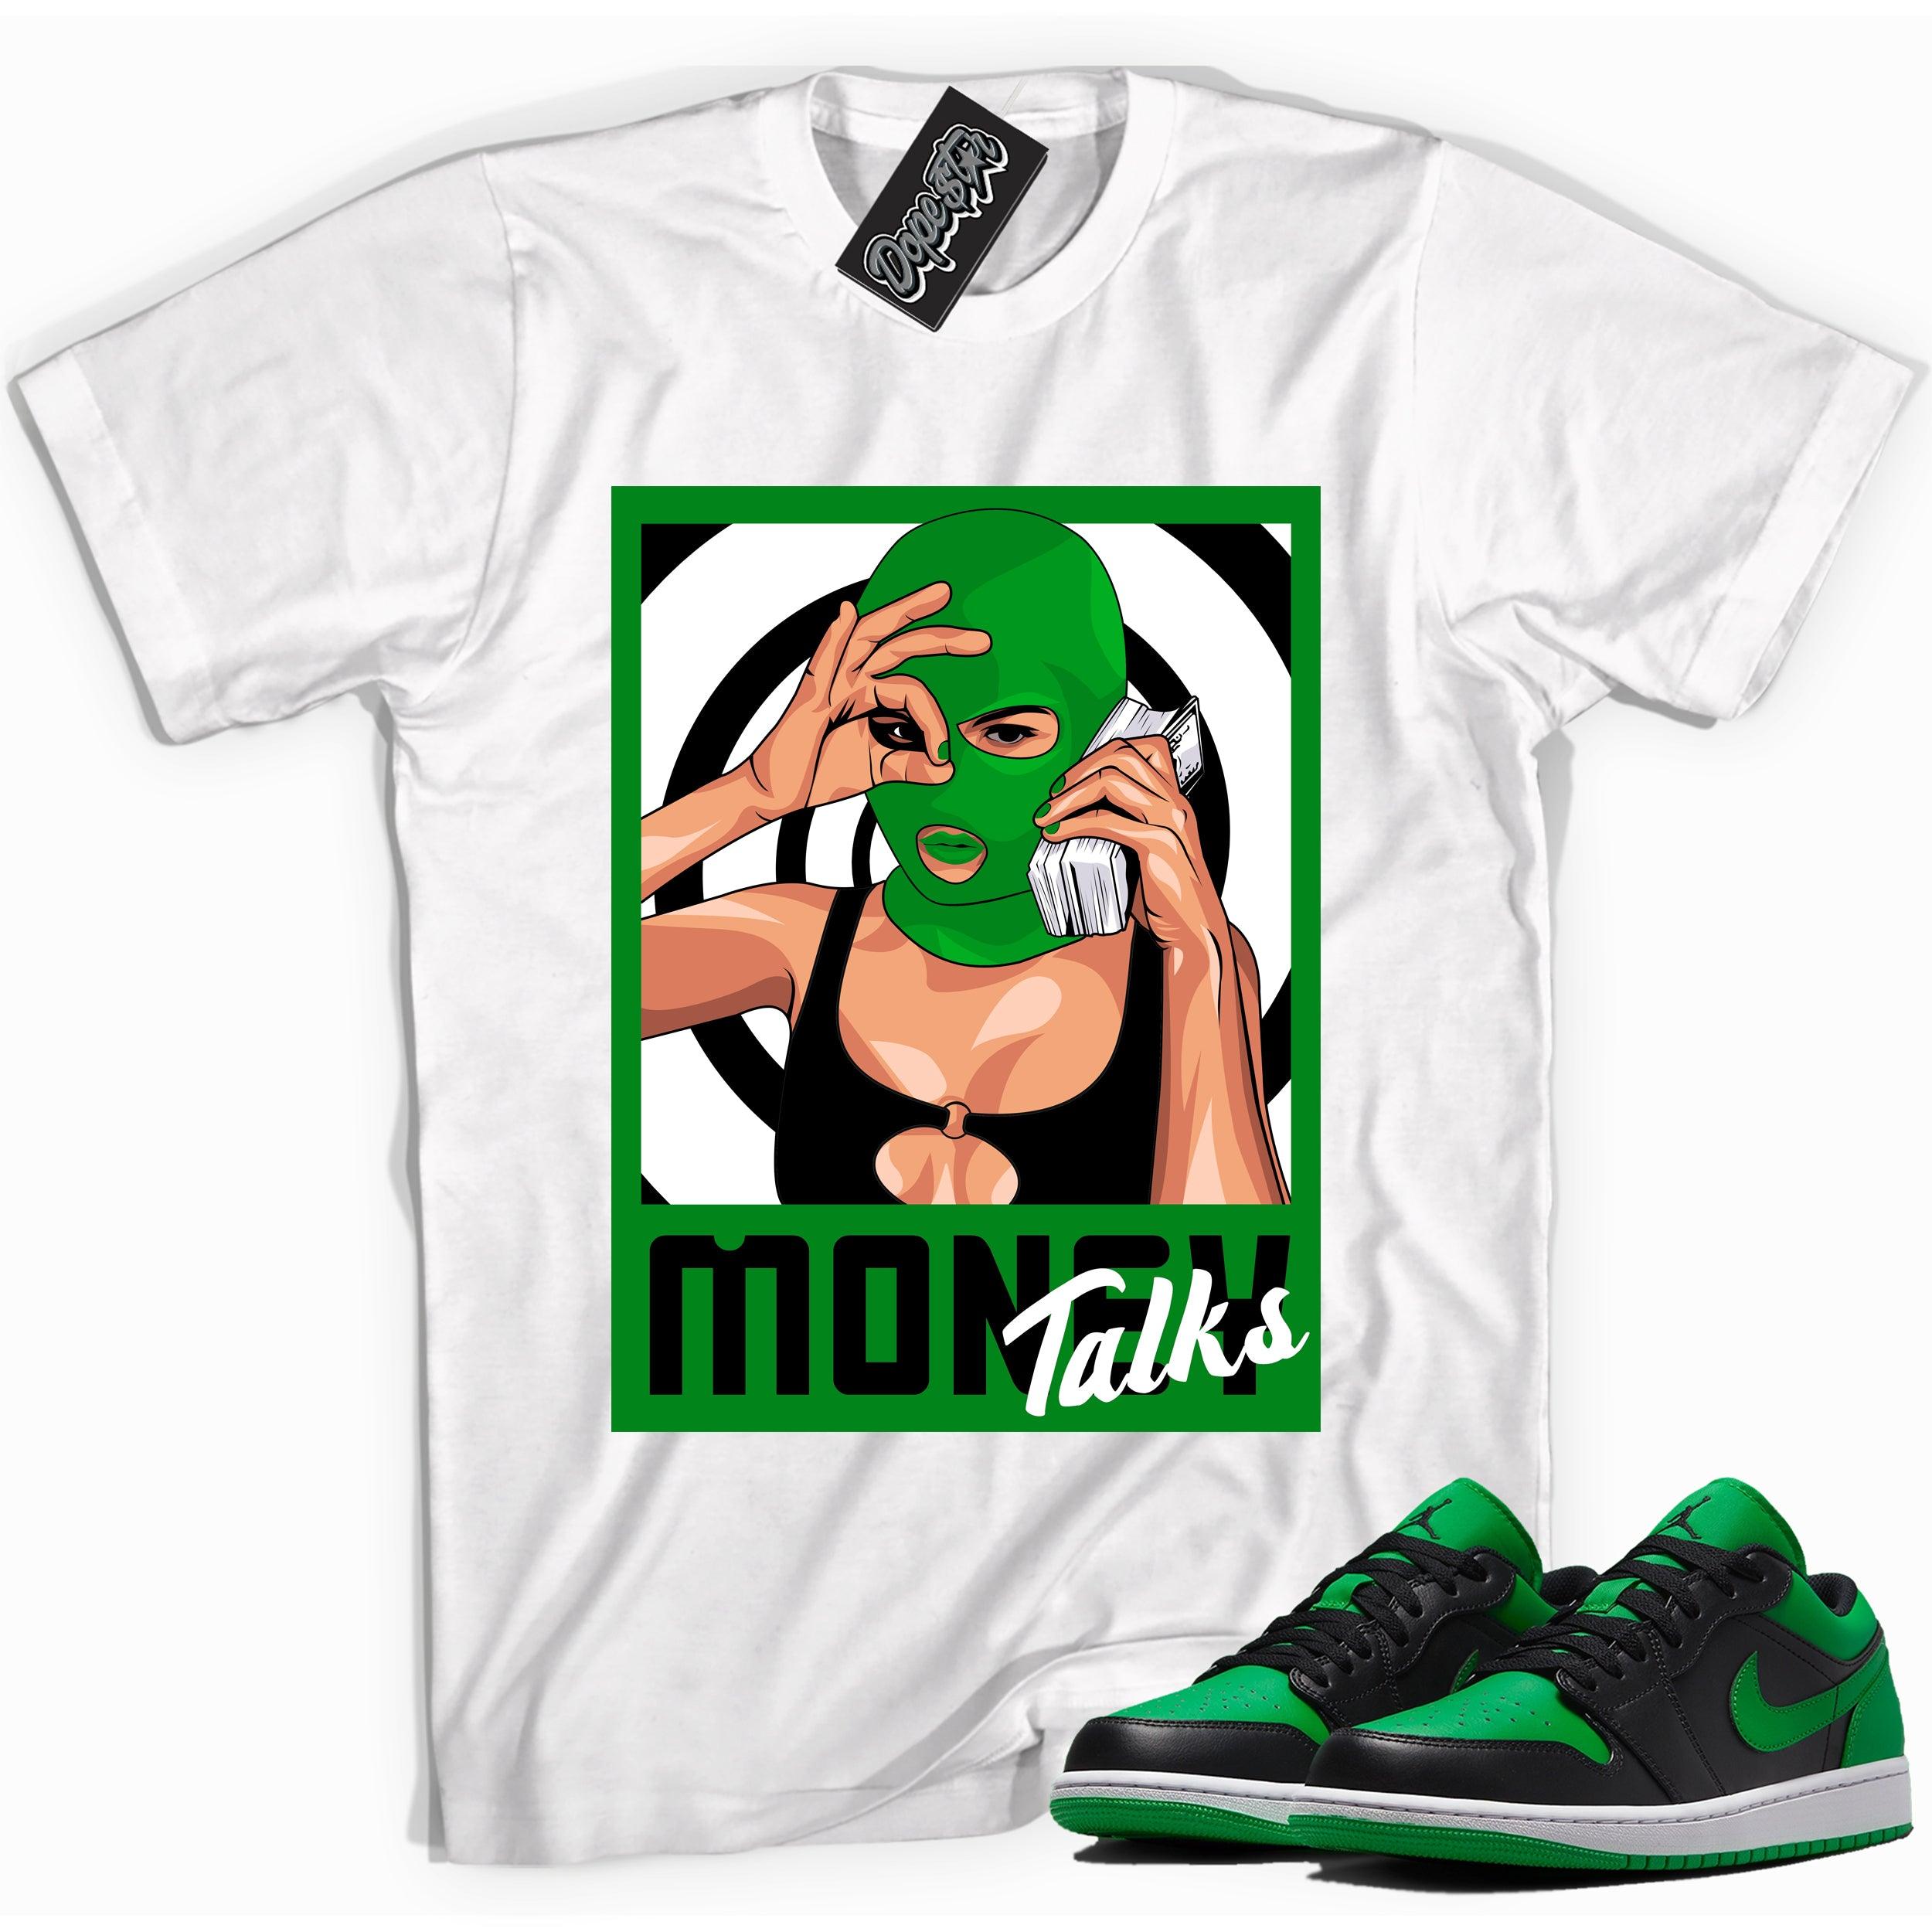 Cool white graphic tee with 'money talks' print, that perfectly matches Air Jordan 1 Low Lucky Green sneakers